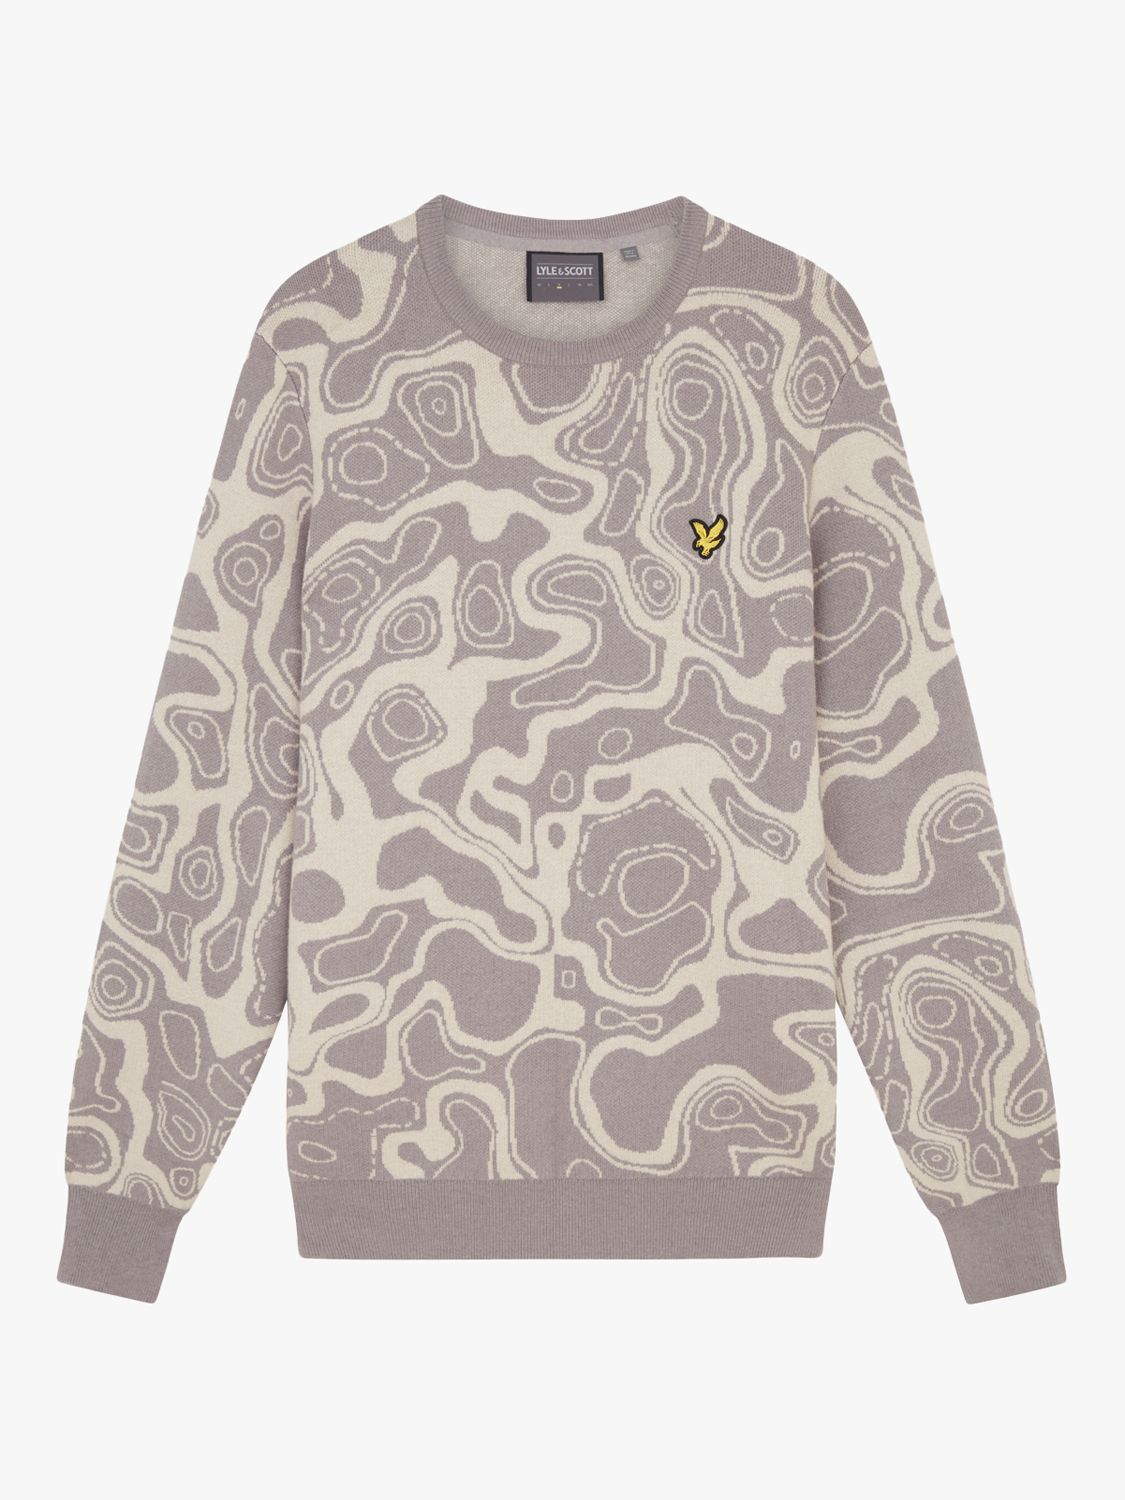 Lyle & Scott Contour Abstract Pullover Jumper at John Lewis & Partners